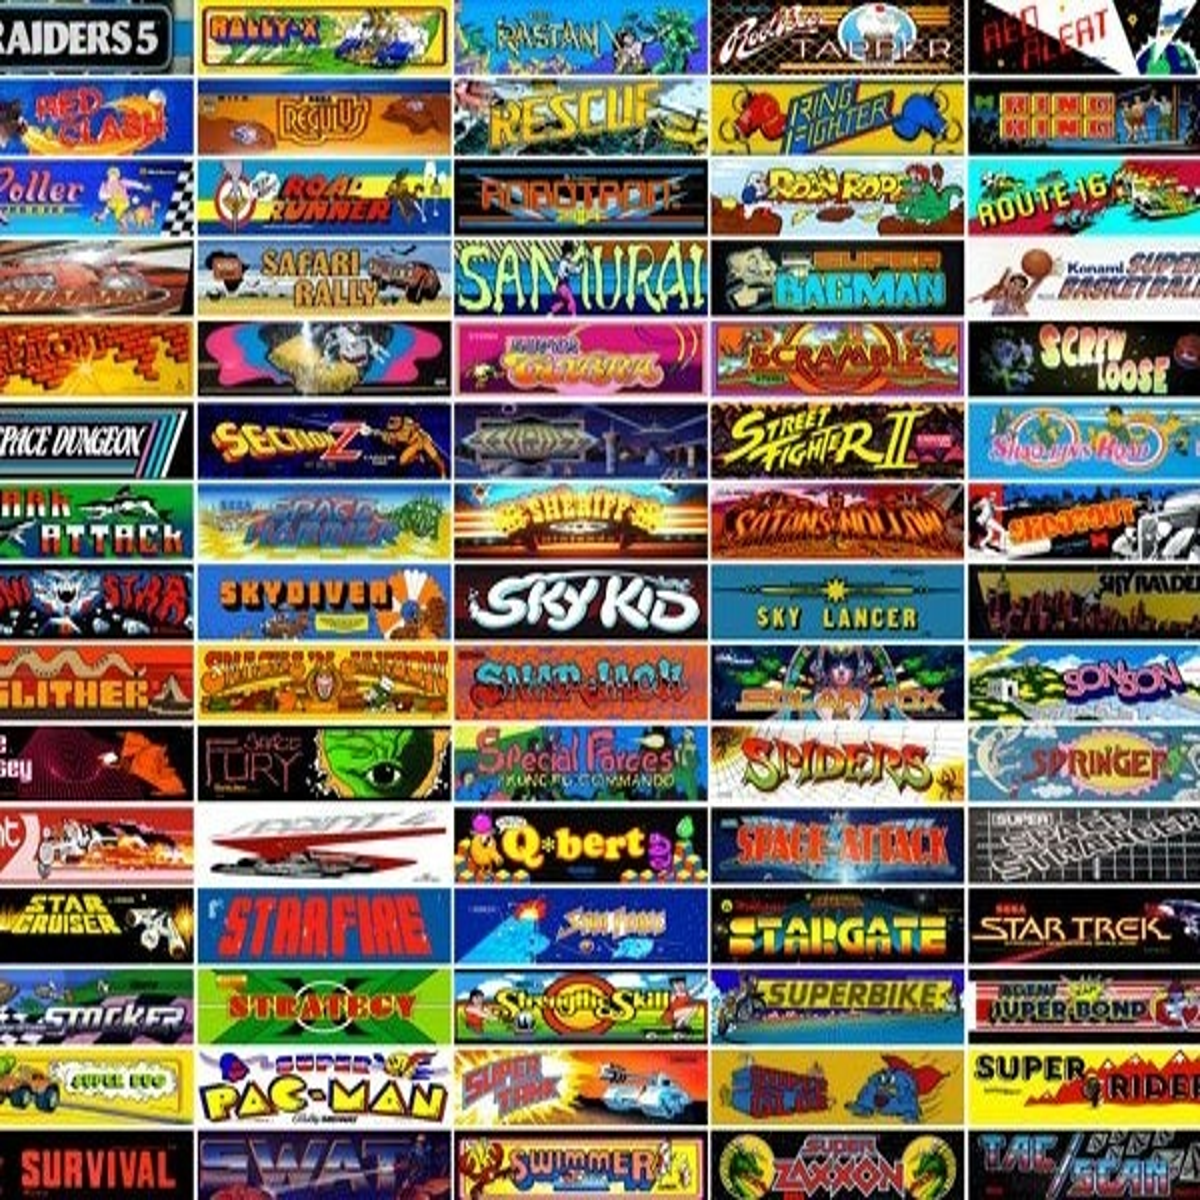 Play your retro games collection right through the web browser